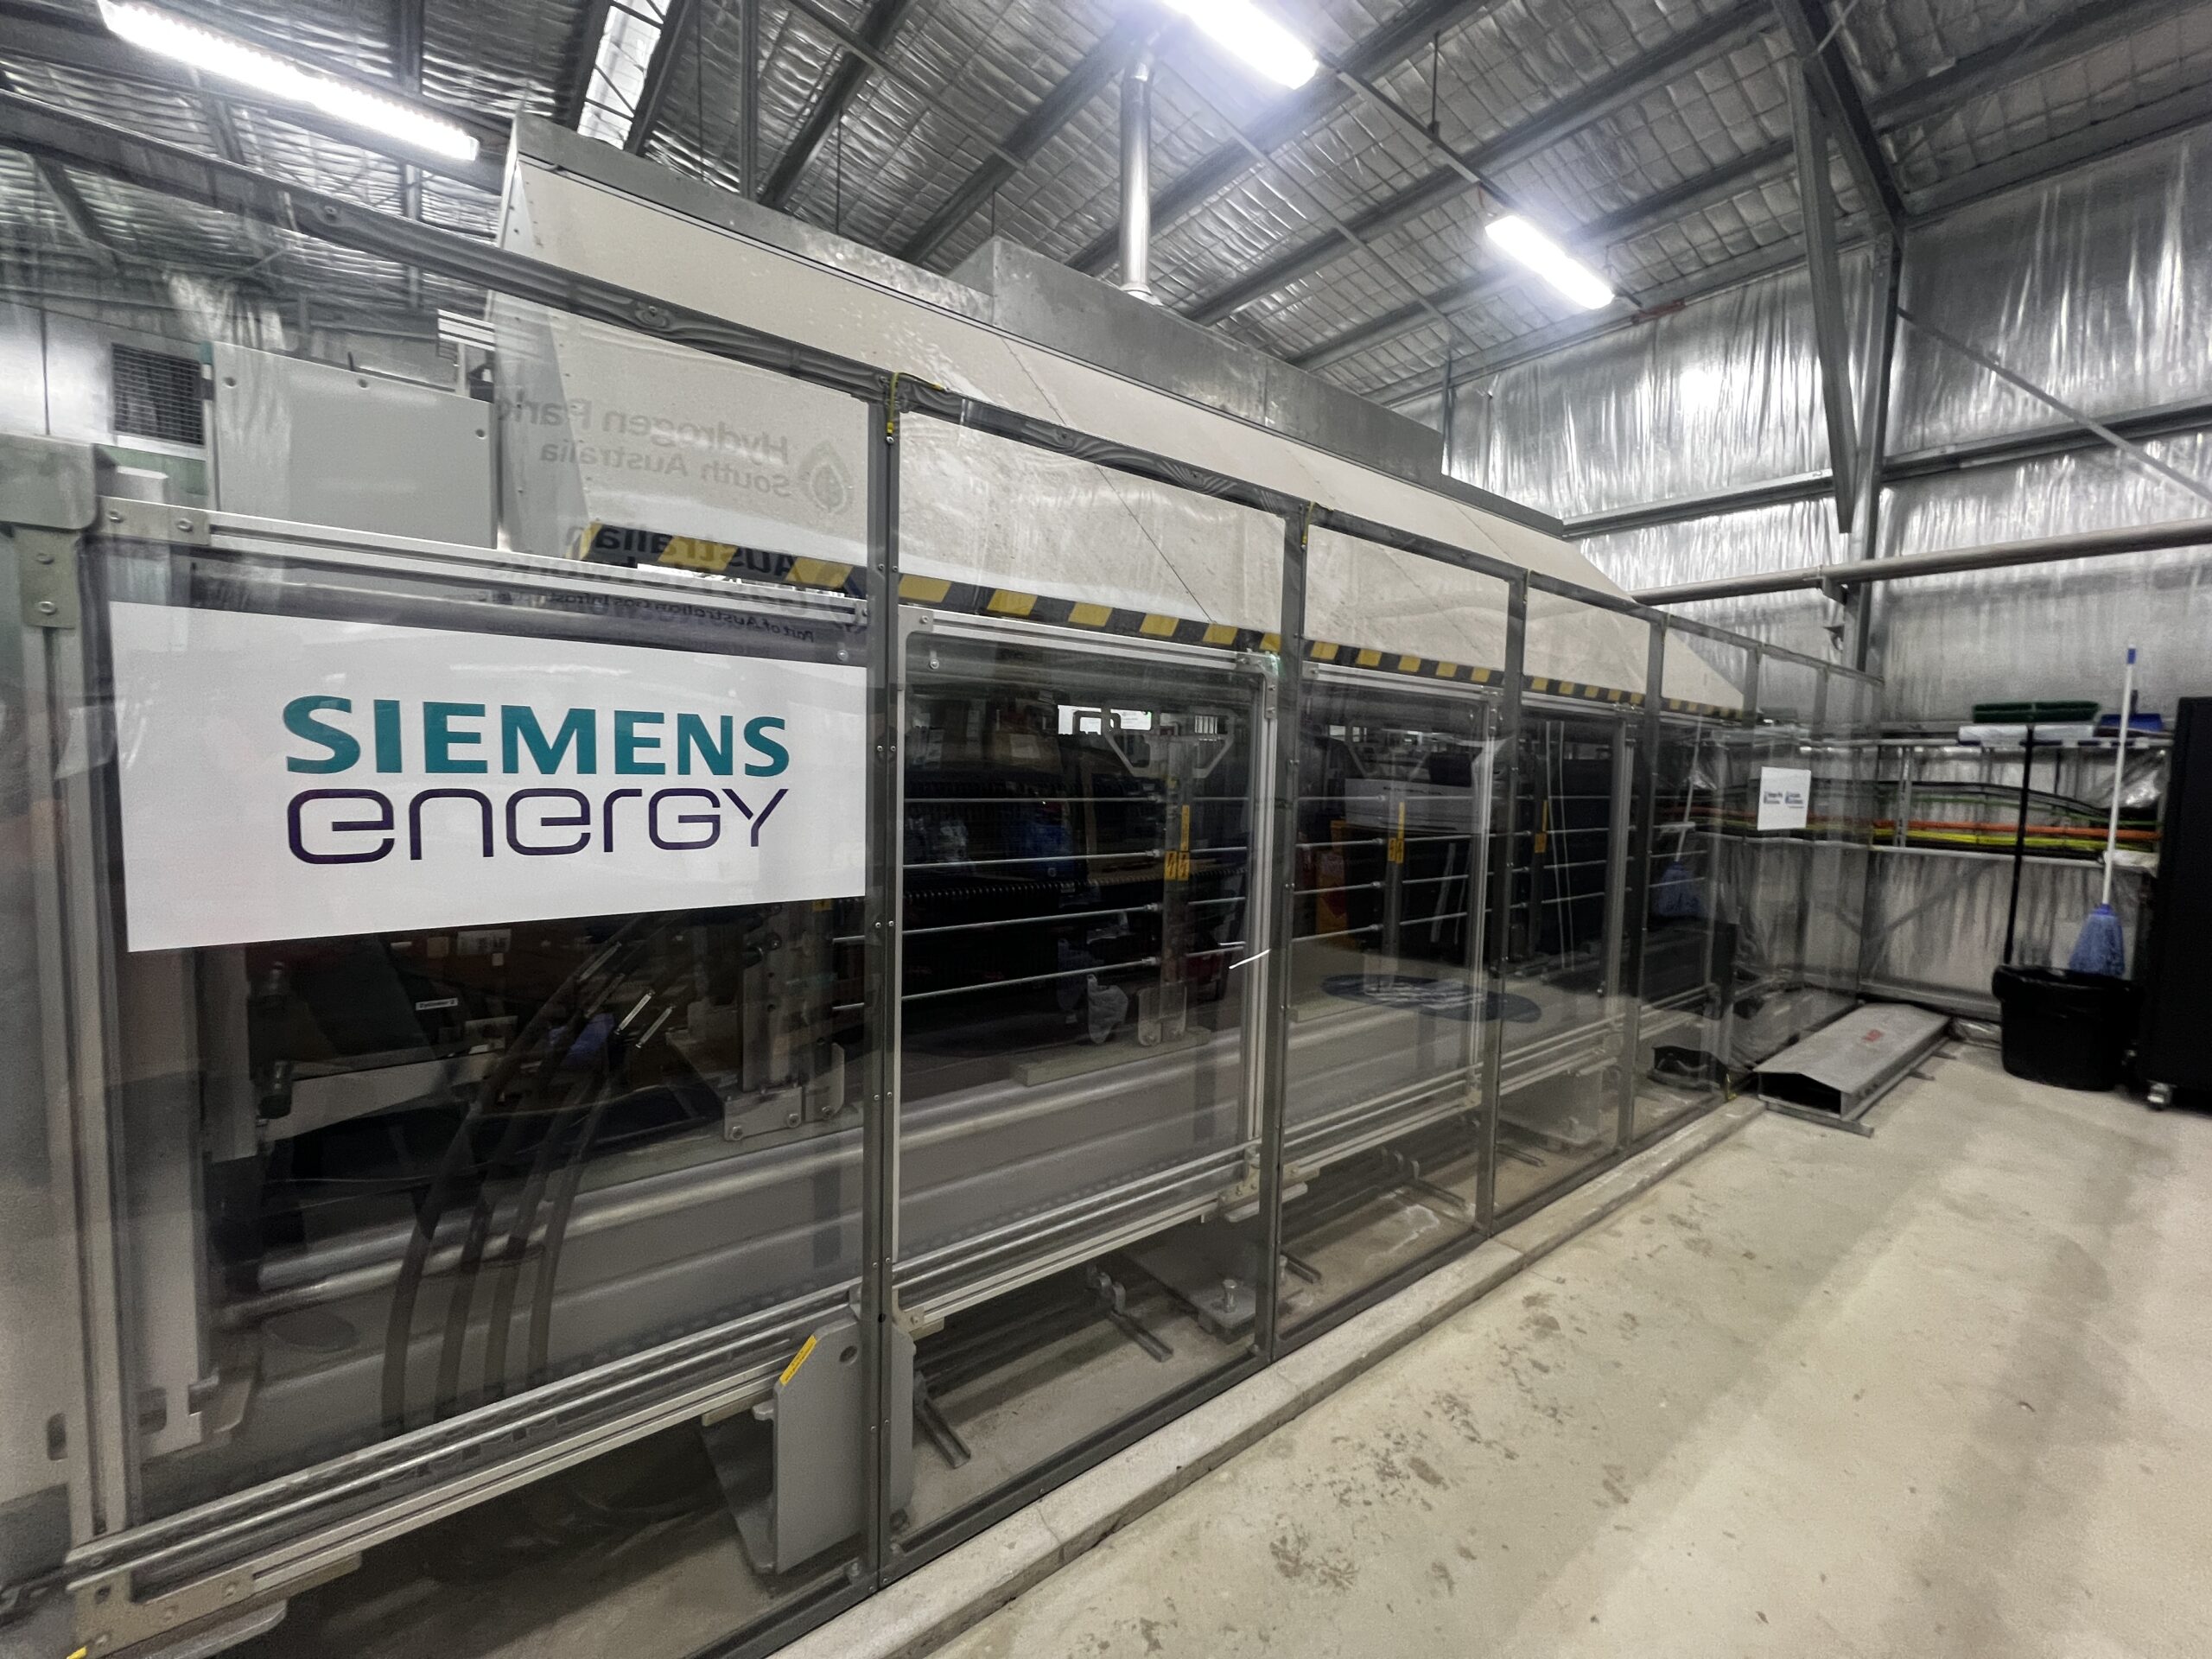 Inside a hydrogen electrolyzer facility, with a sign that says "Siemens Energy" on it. 